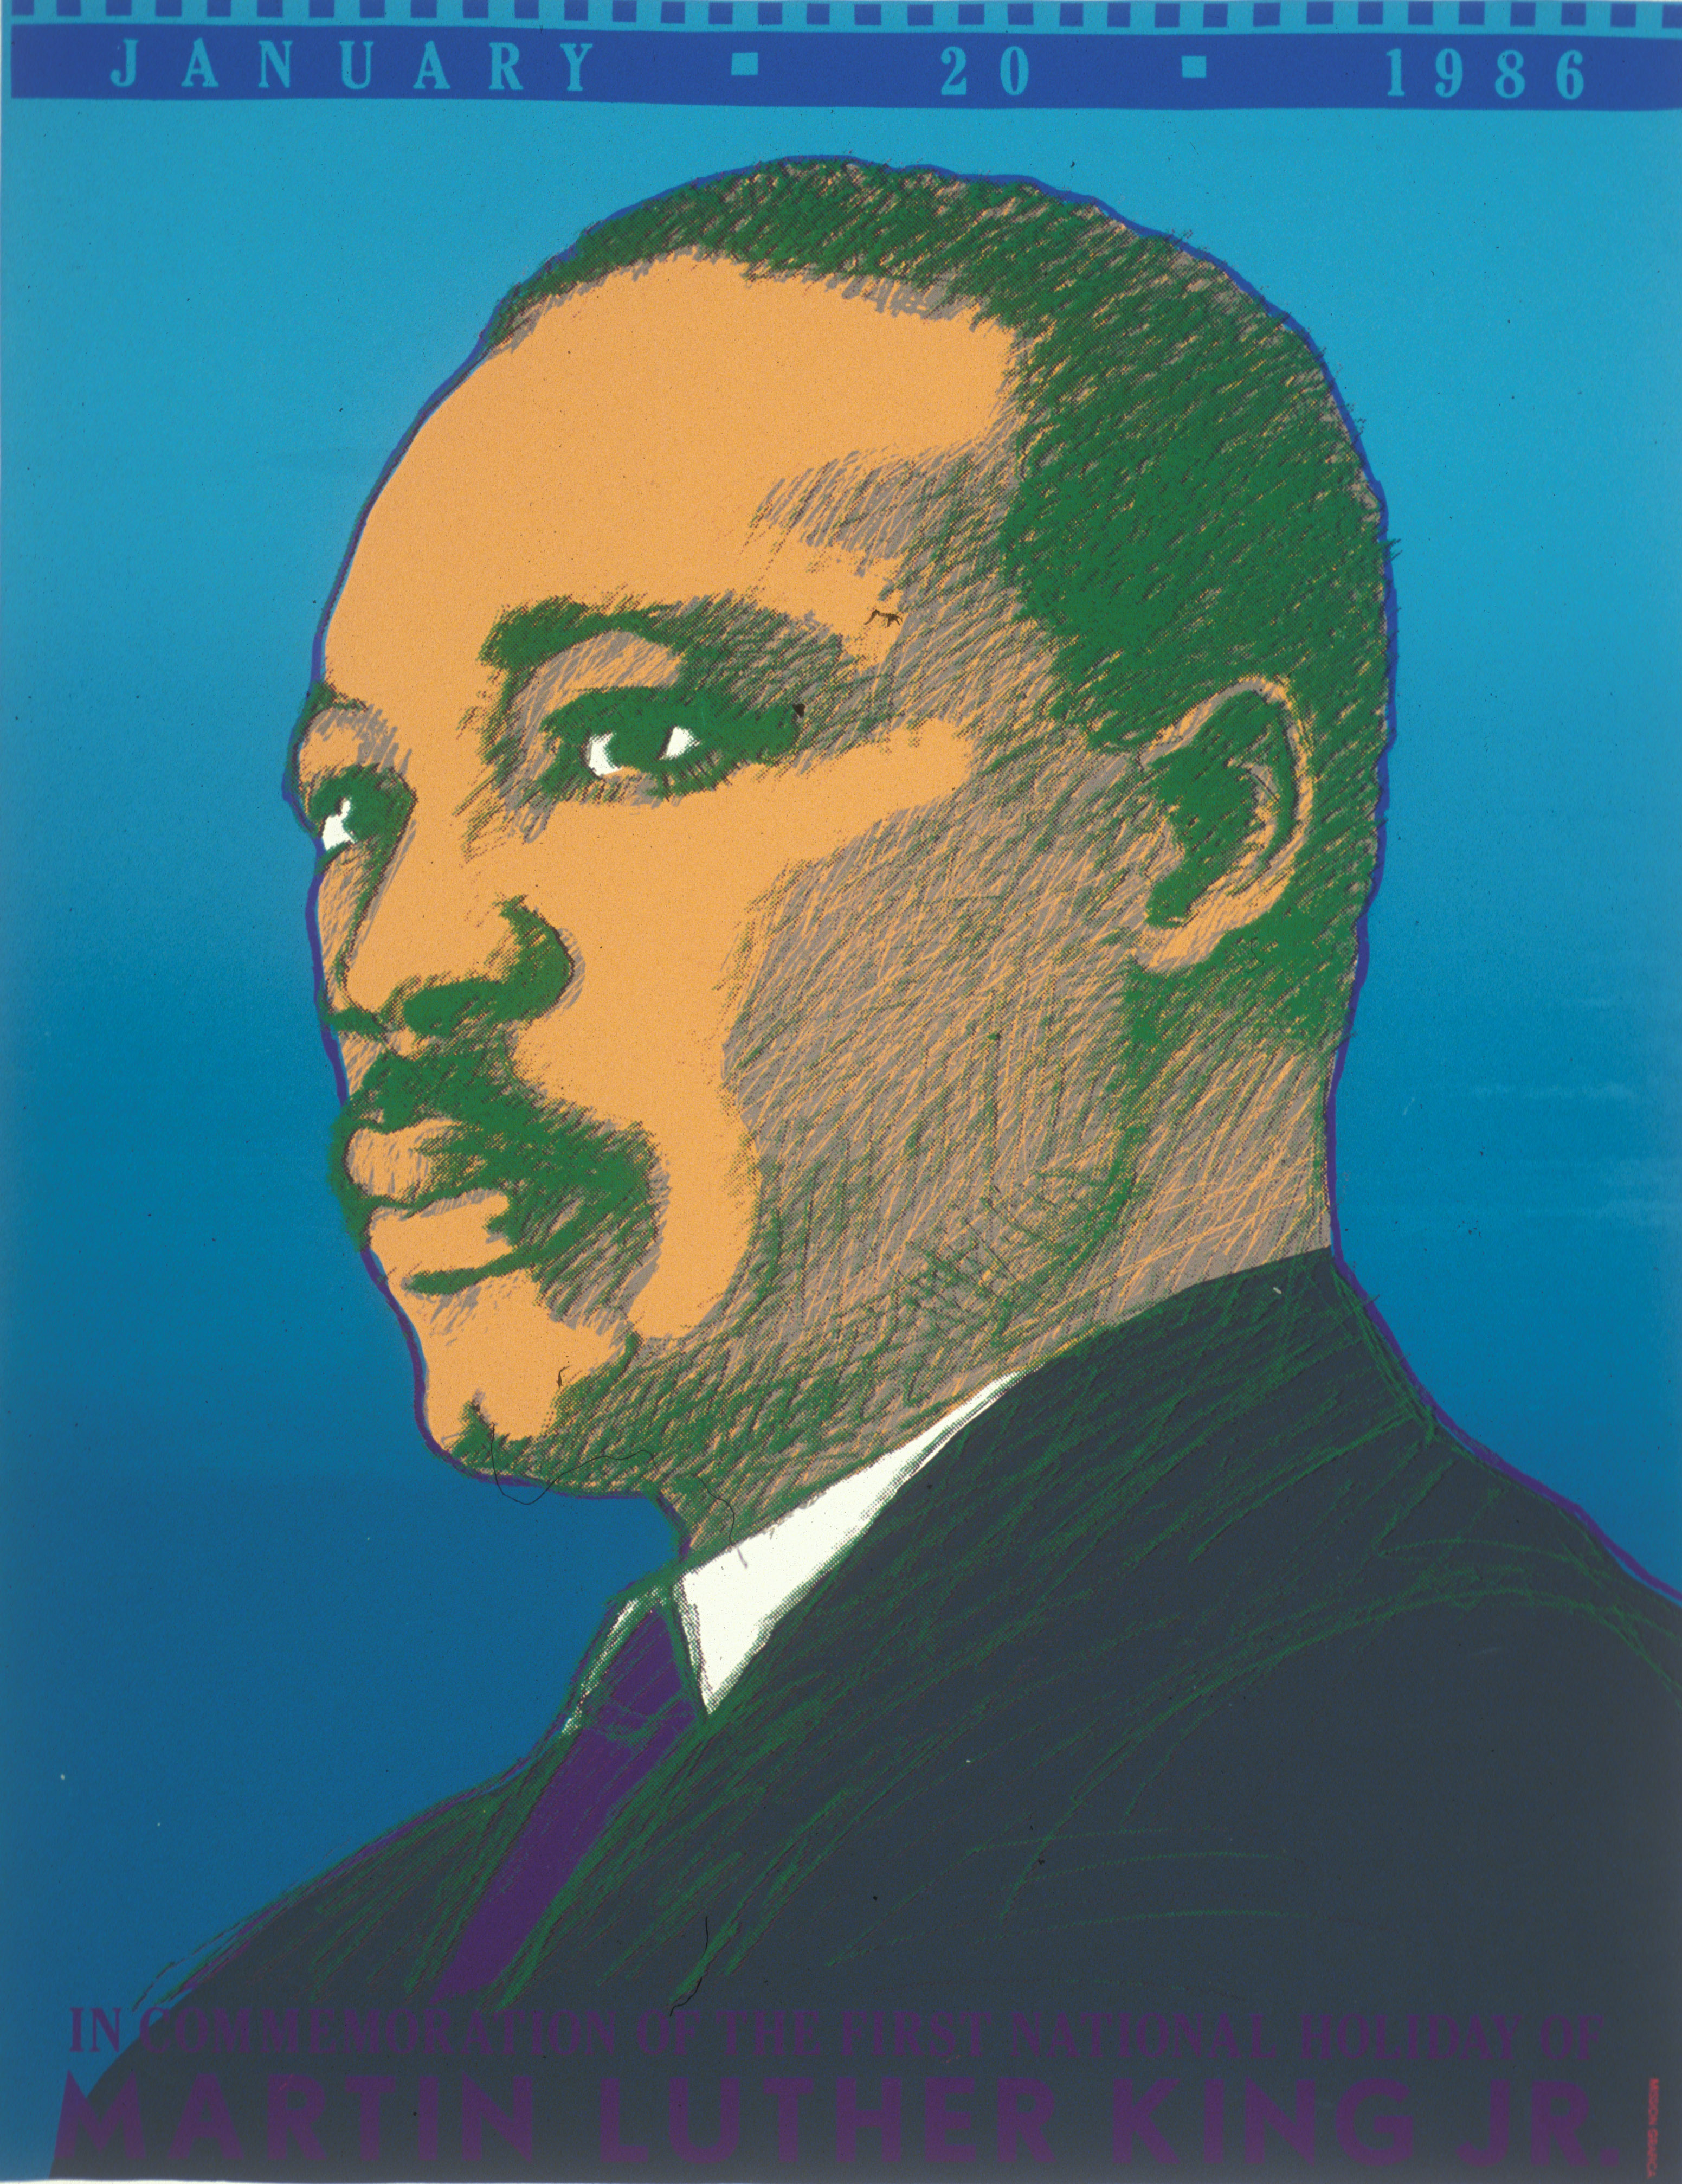 Walk With Us: In Commemoration of the Martin Luther King, Jr